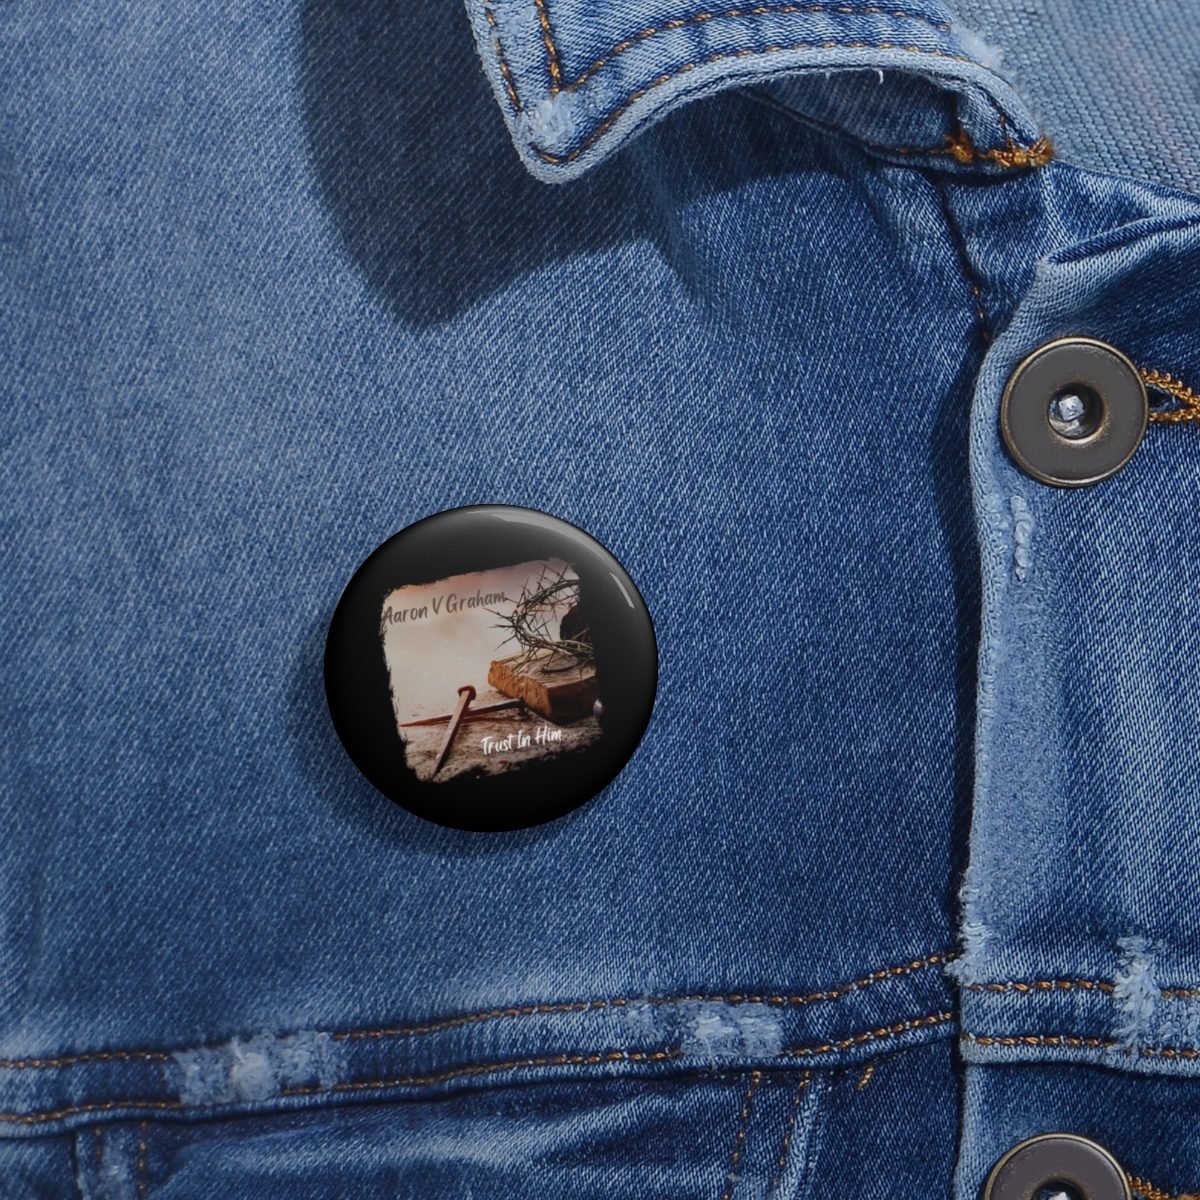 Aaron V. Graham – Trust in Him Pin Buttons